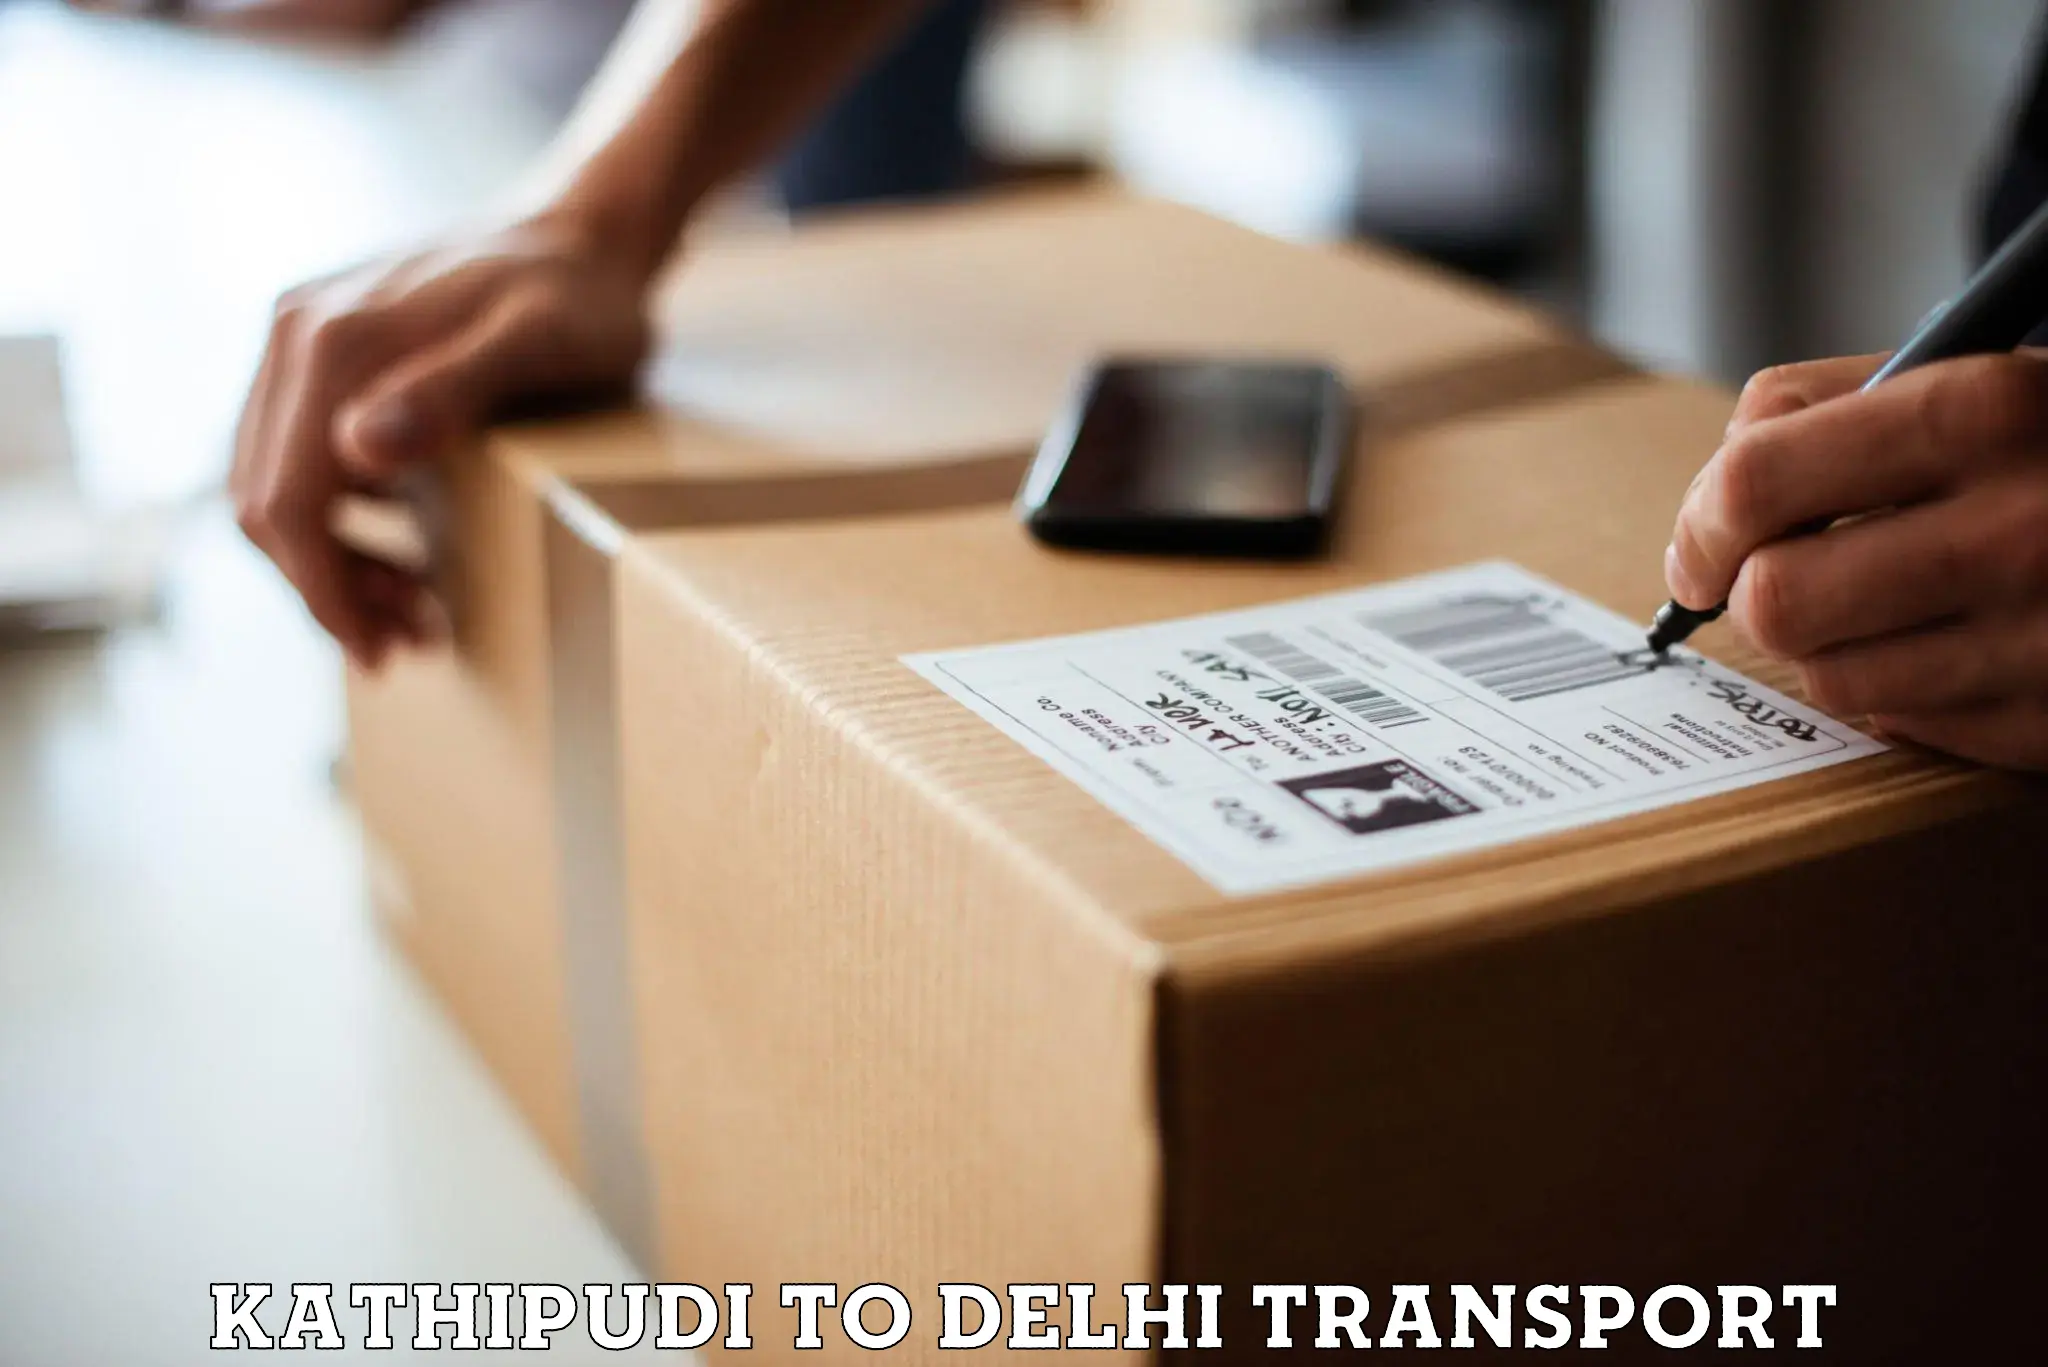 Container transport service Kathipudi to Delhi